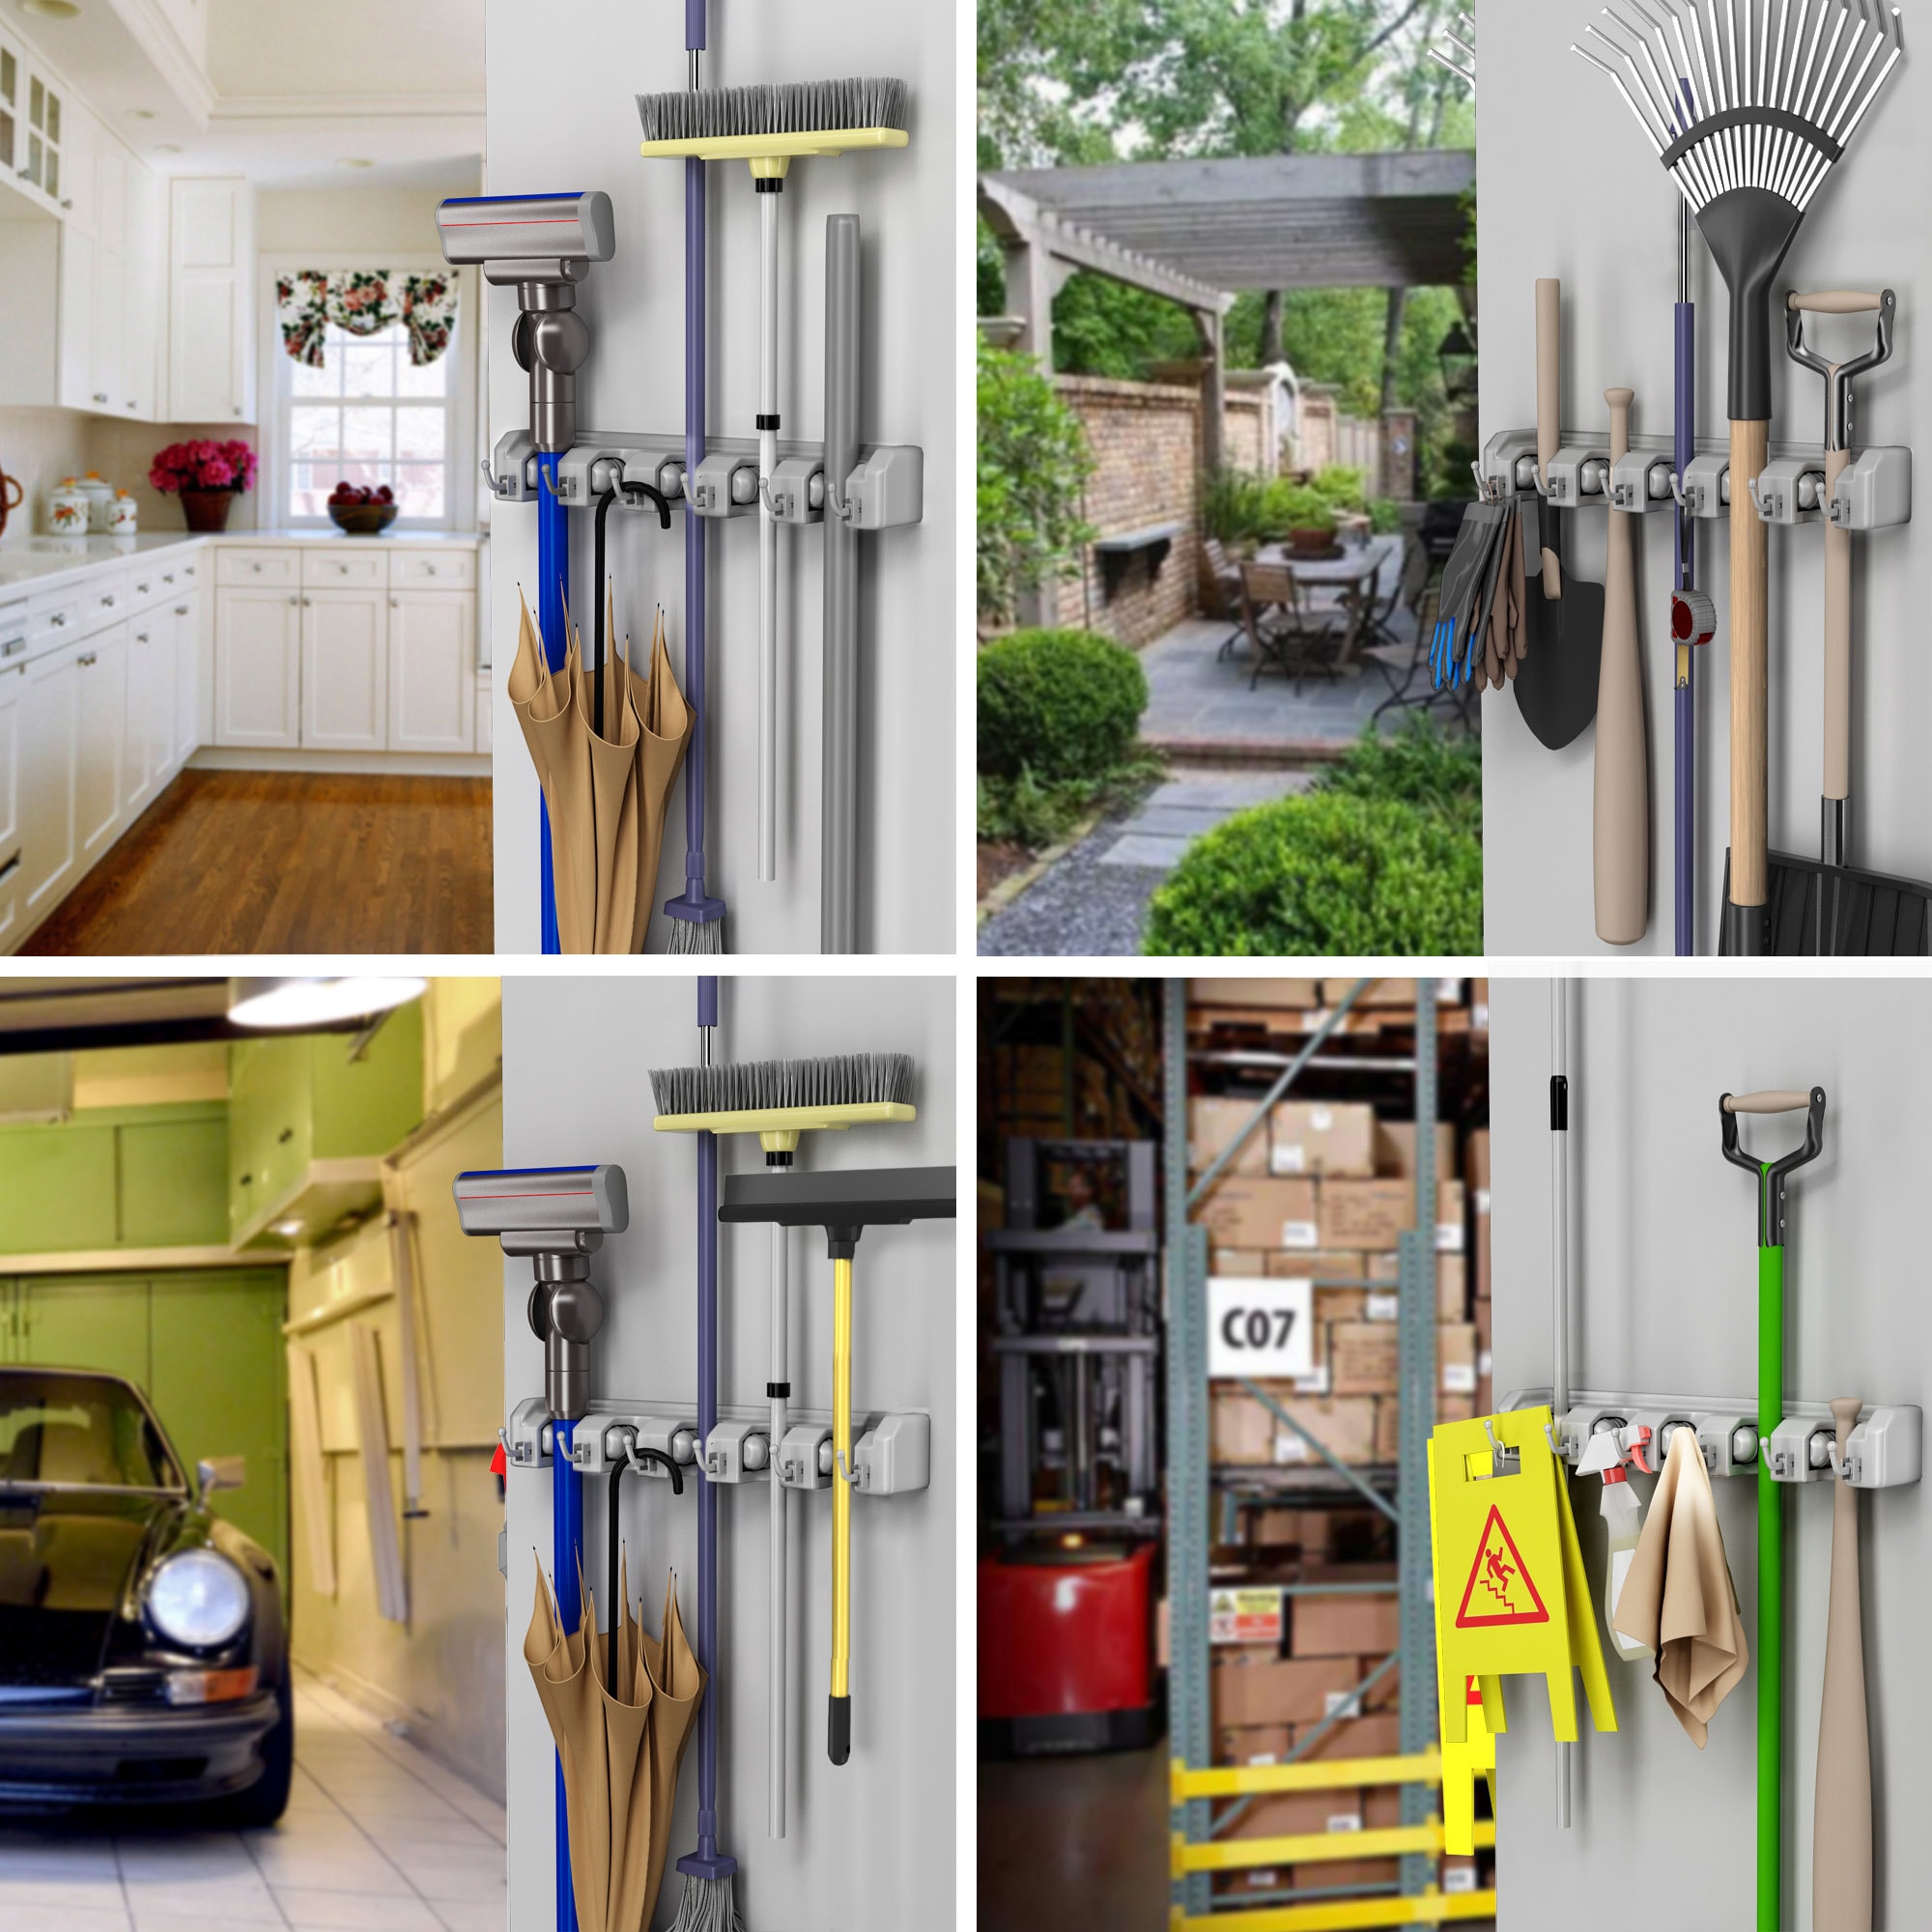 https://ak1.ostkcdn.com/images/products/20220852/Shovel-Rake-and-Tool-Holder-with-Hooks-Wall-Mounted-Organizer-for-Space-Saving-Rack-by-Stalwart-a2b0b302-629e-4e3f-b3a9-2960ca55d8ad.jpg